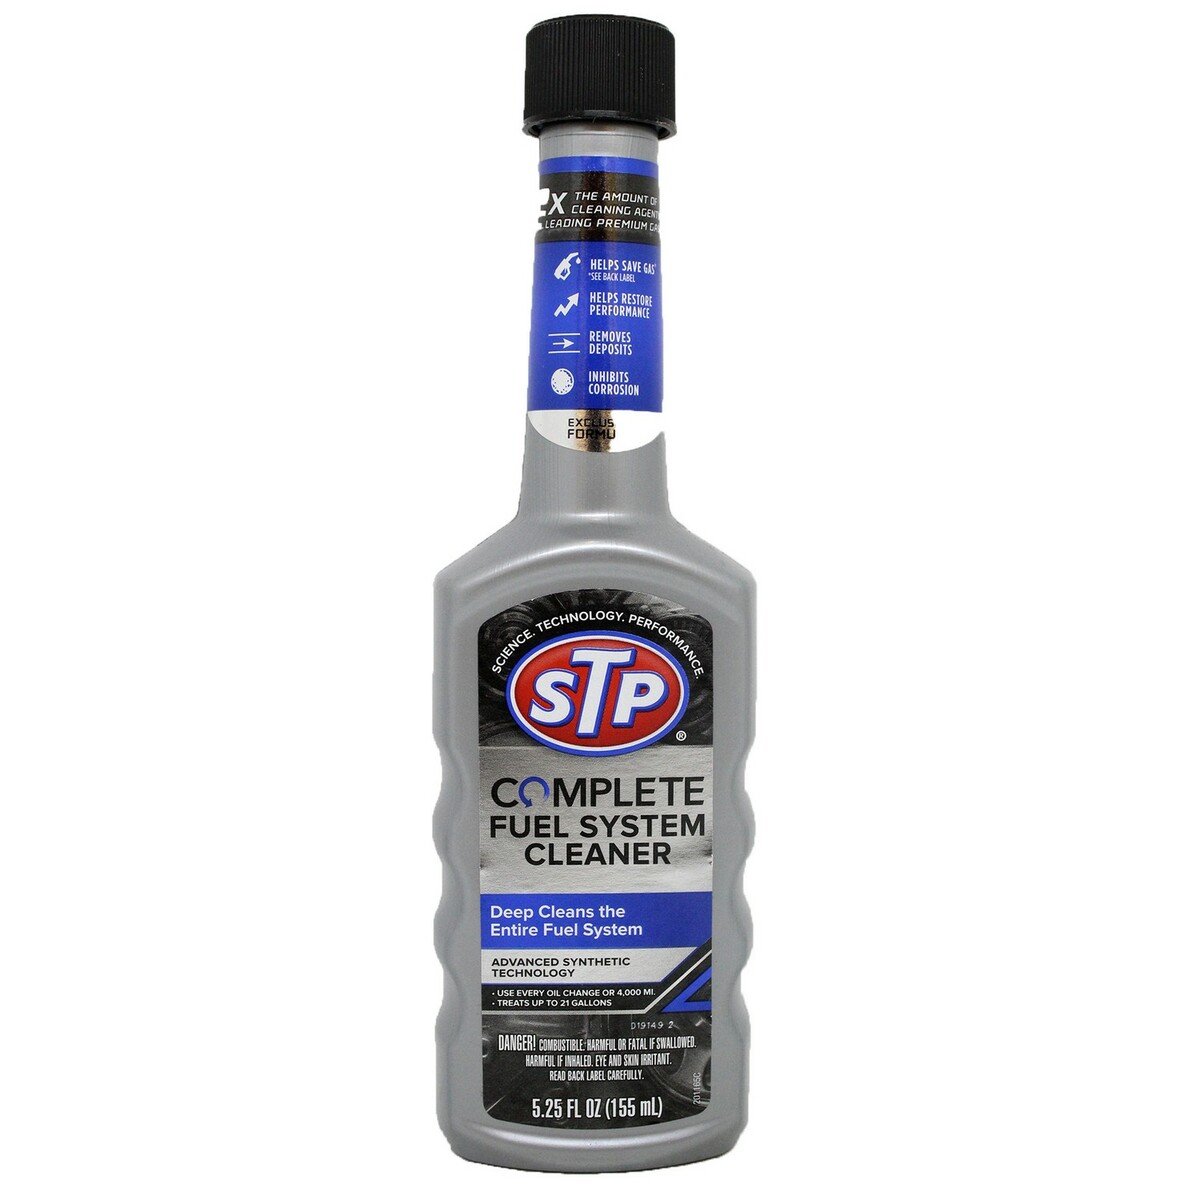 STP Complete Fuel System Cleaner 155ml